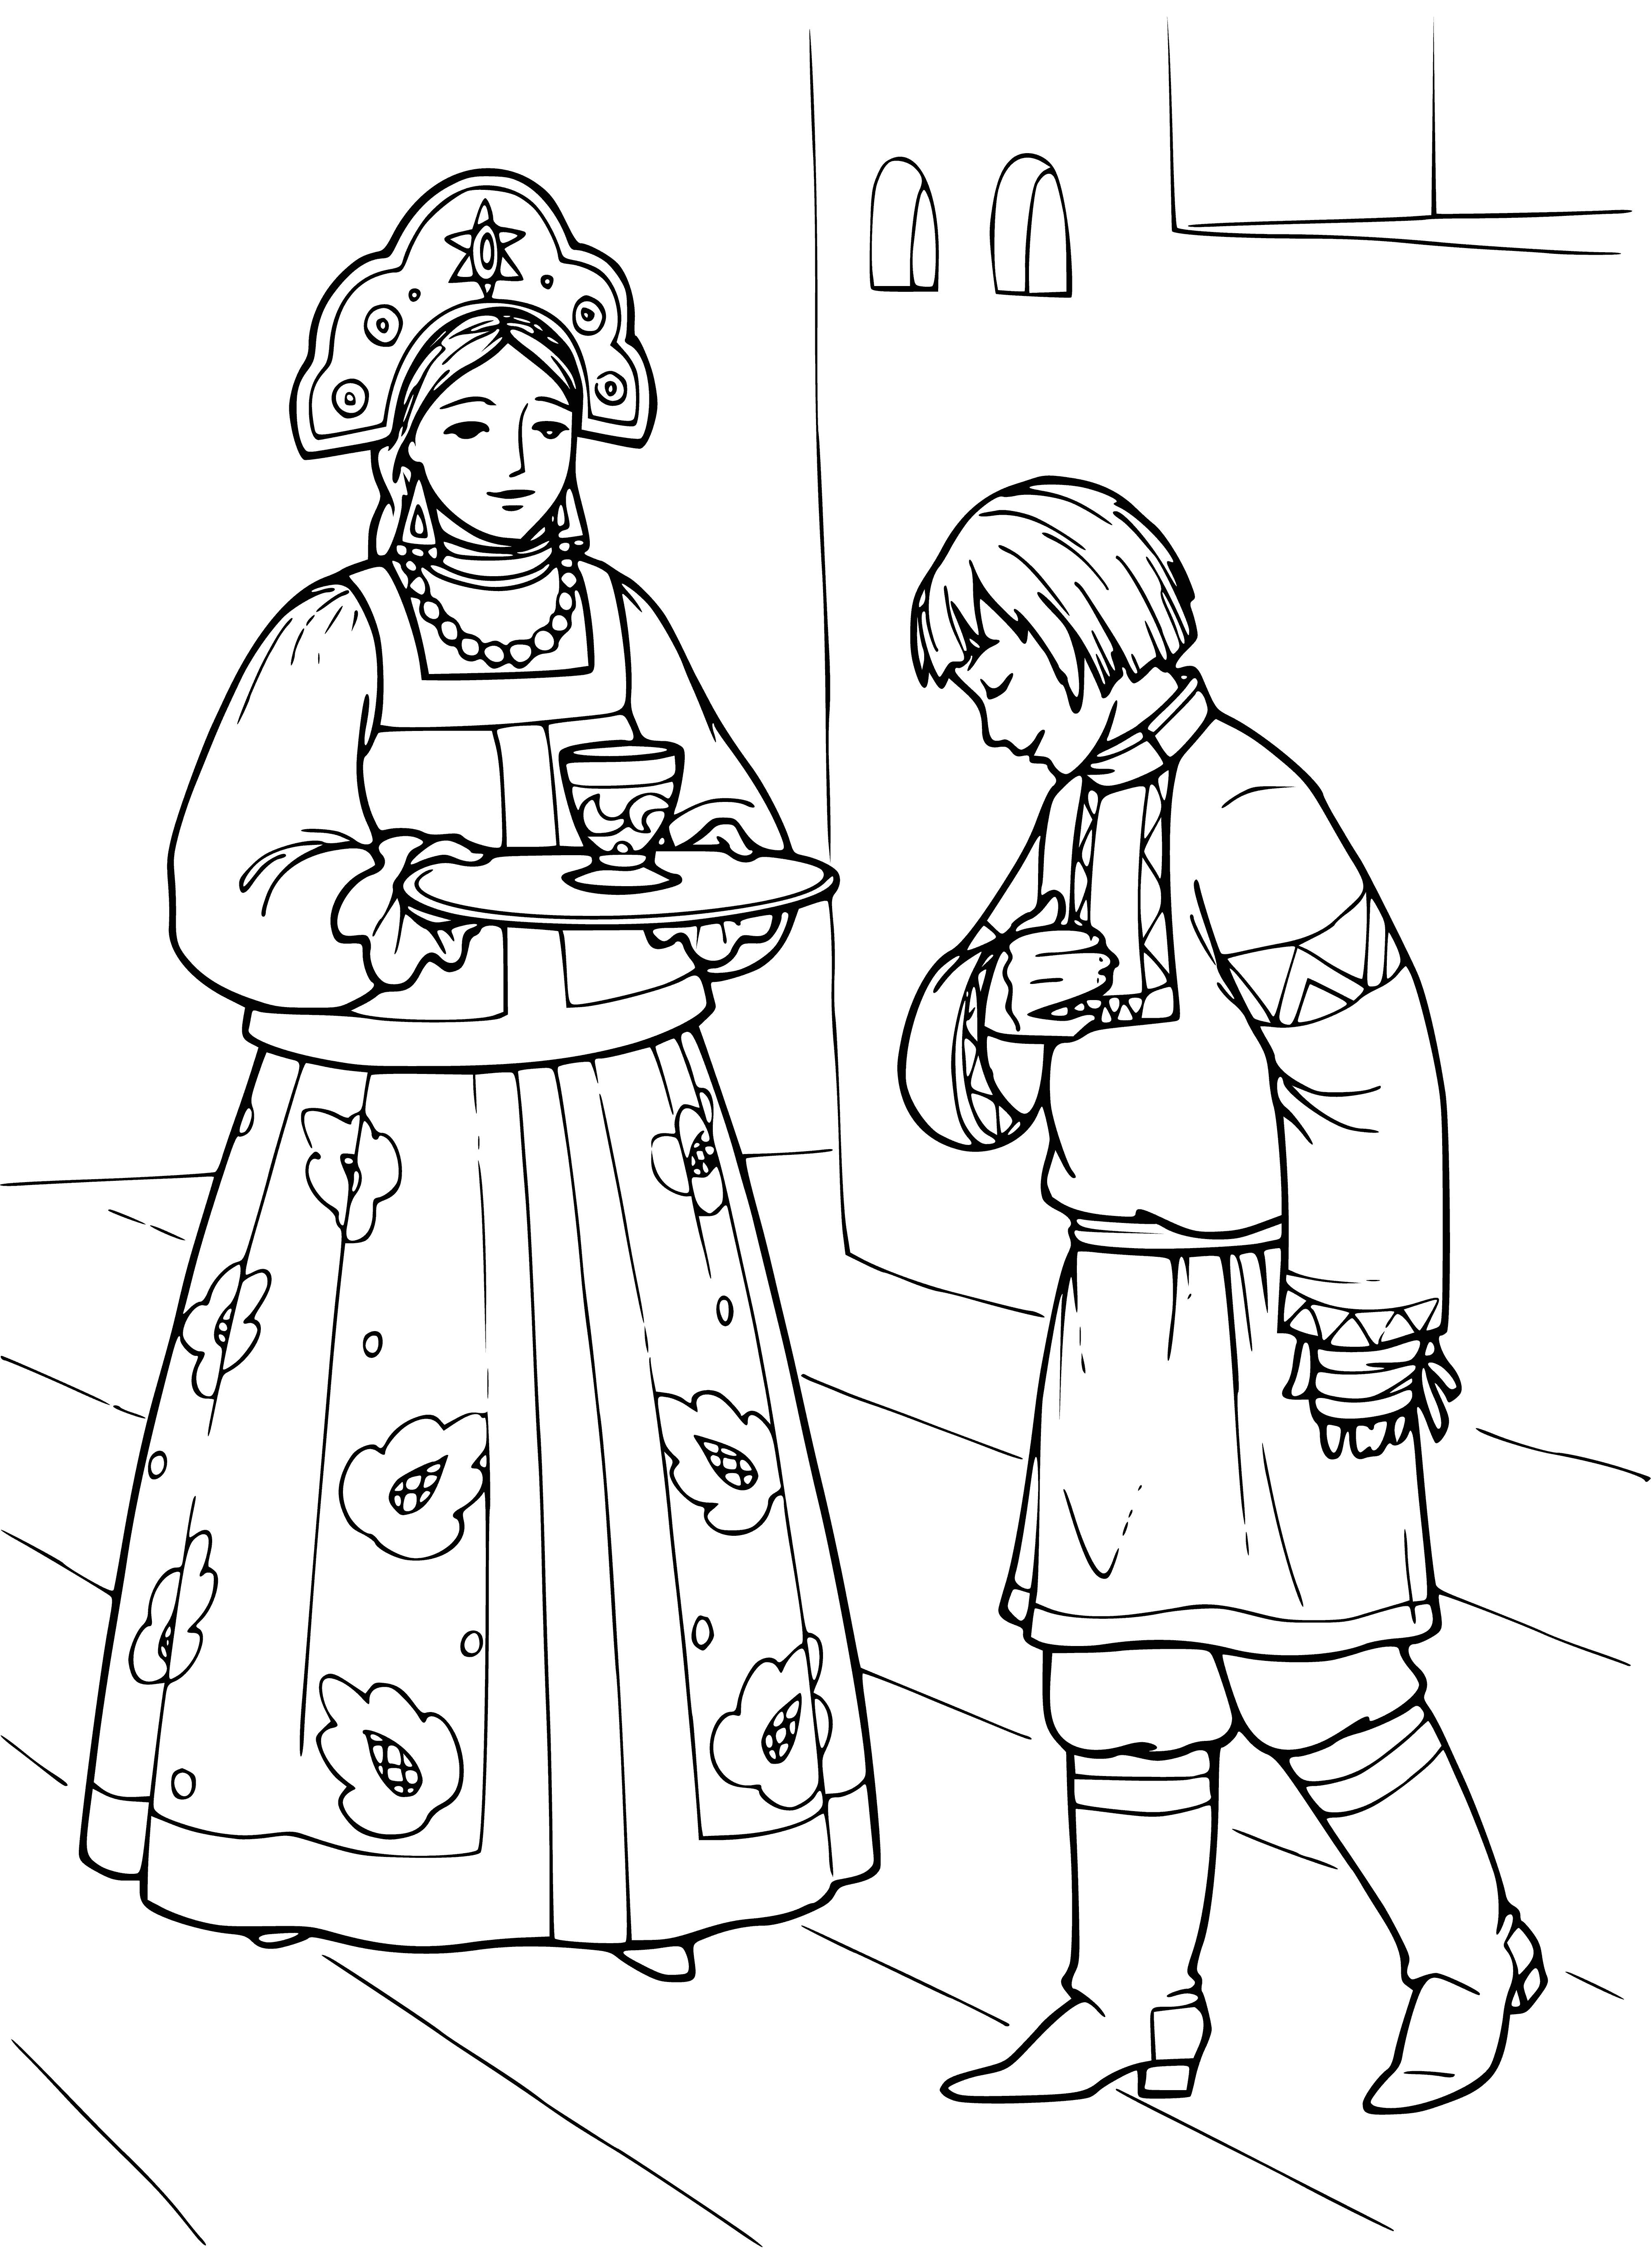 Tsar Maiden coloring page